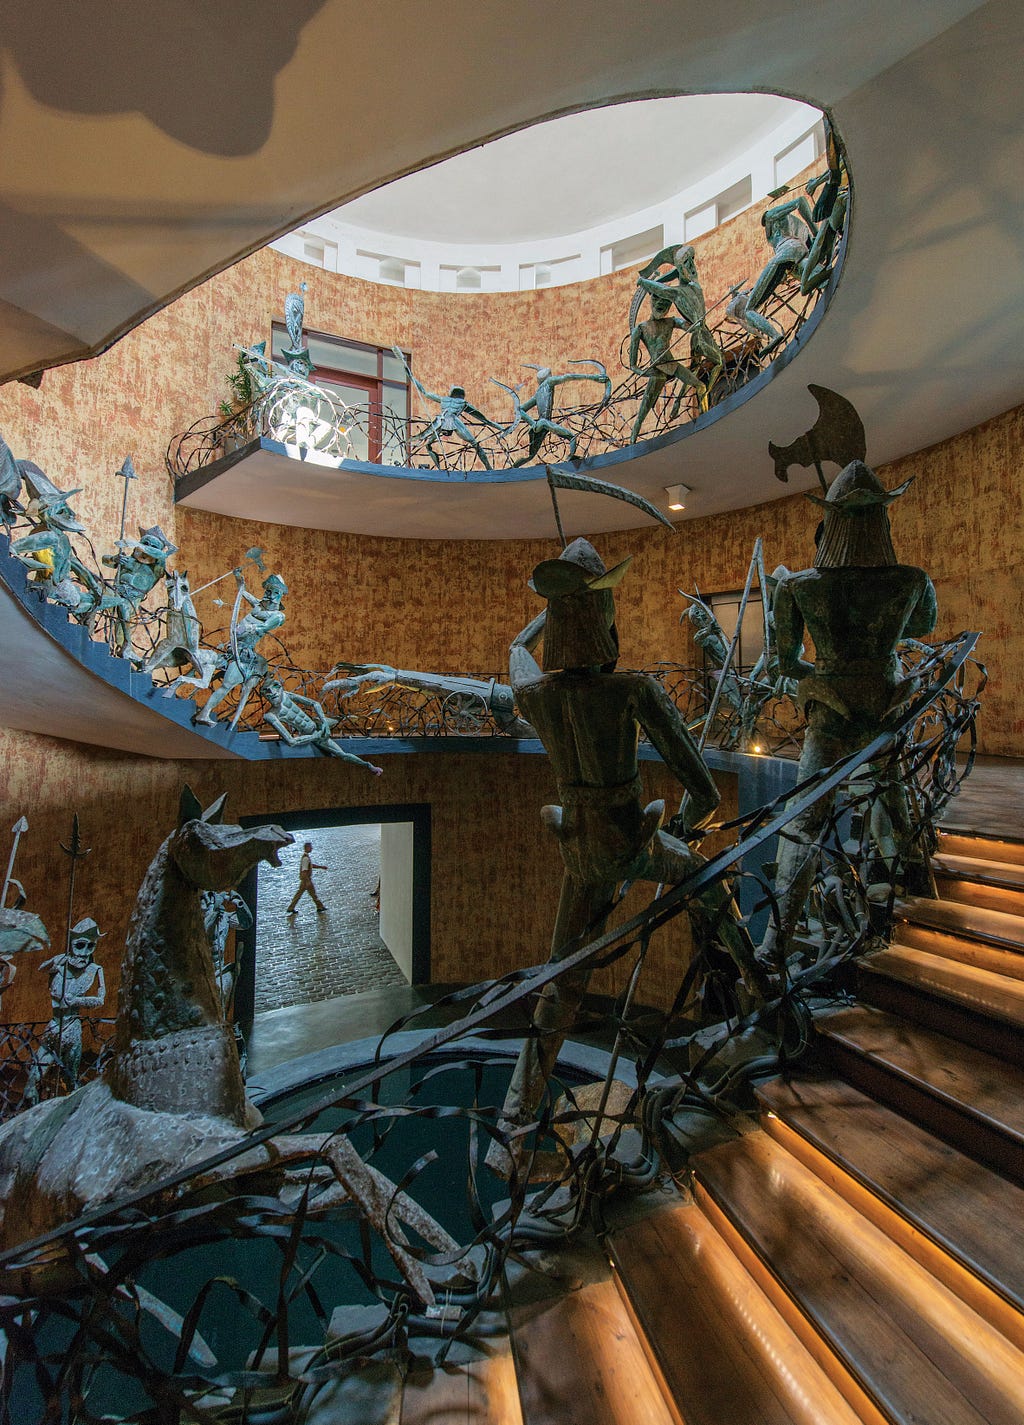 A huge circular staircase made with concrete and the railings are decrorated with metal sculptures of warriors and horses which resembles a battle. The staircase is lit with natural light coming from the sky light at the very top.